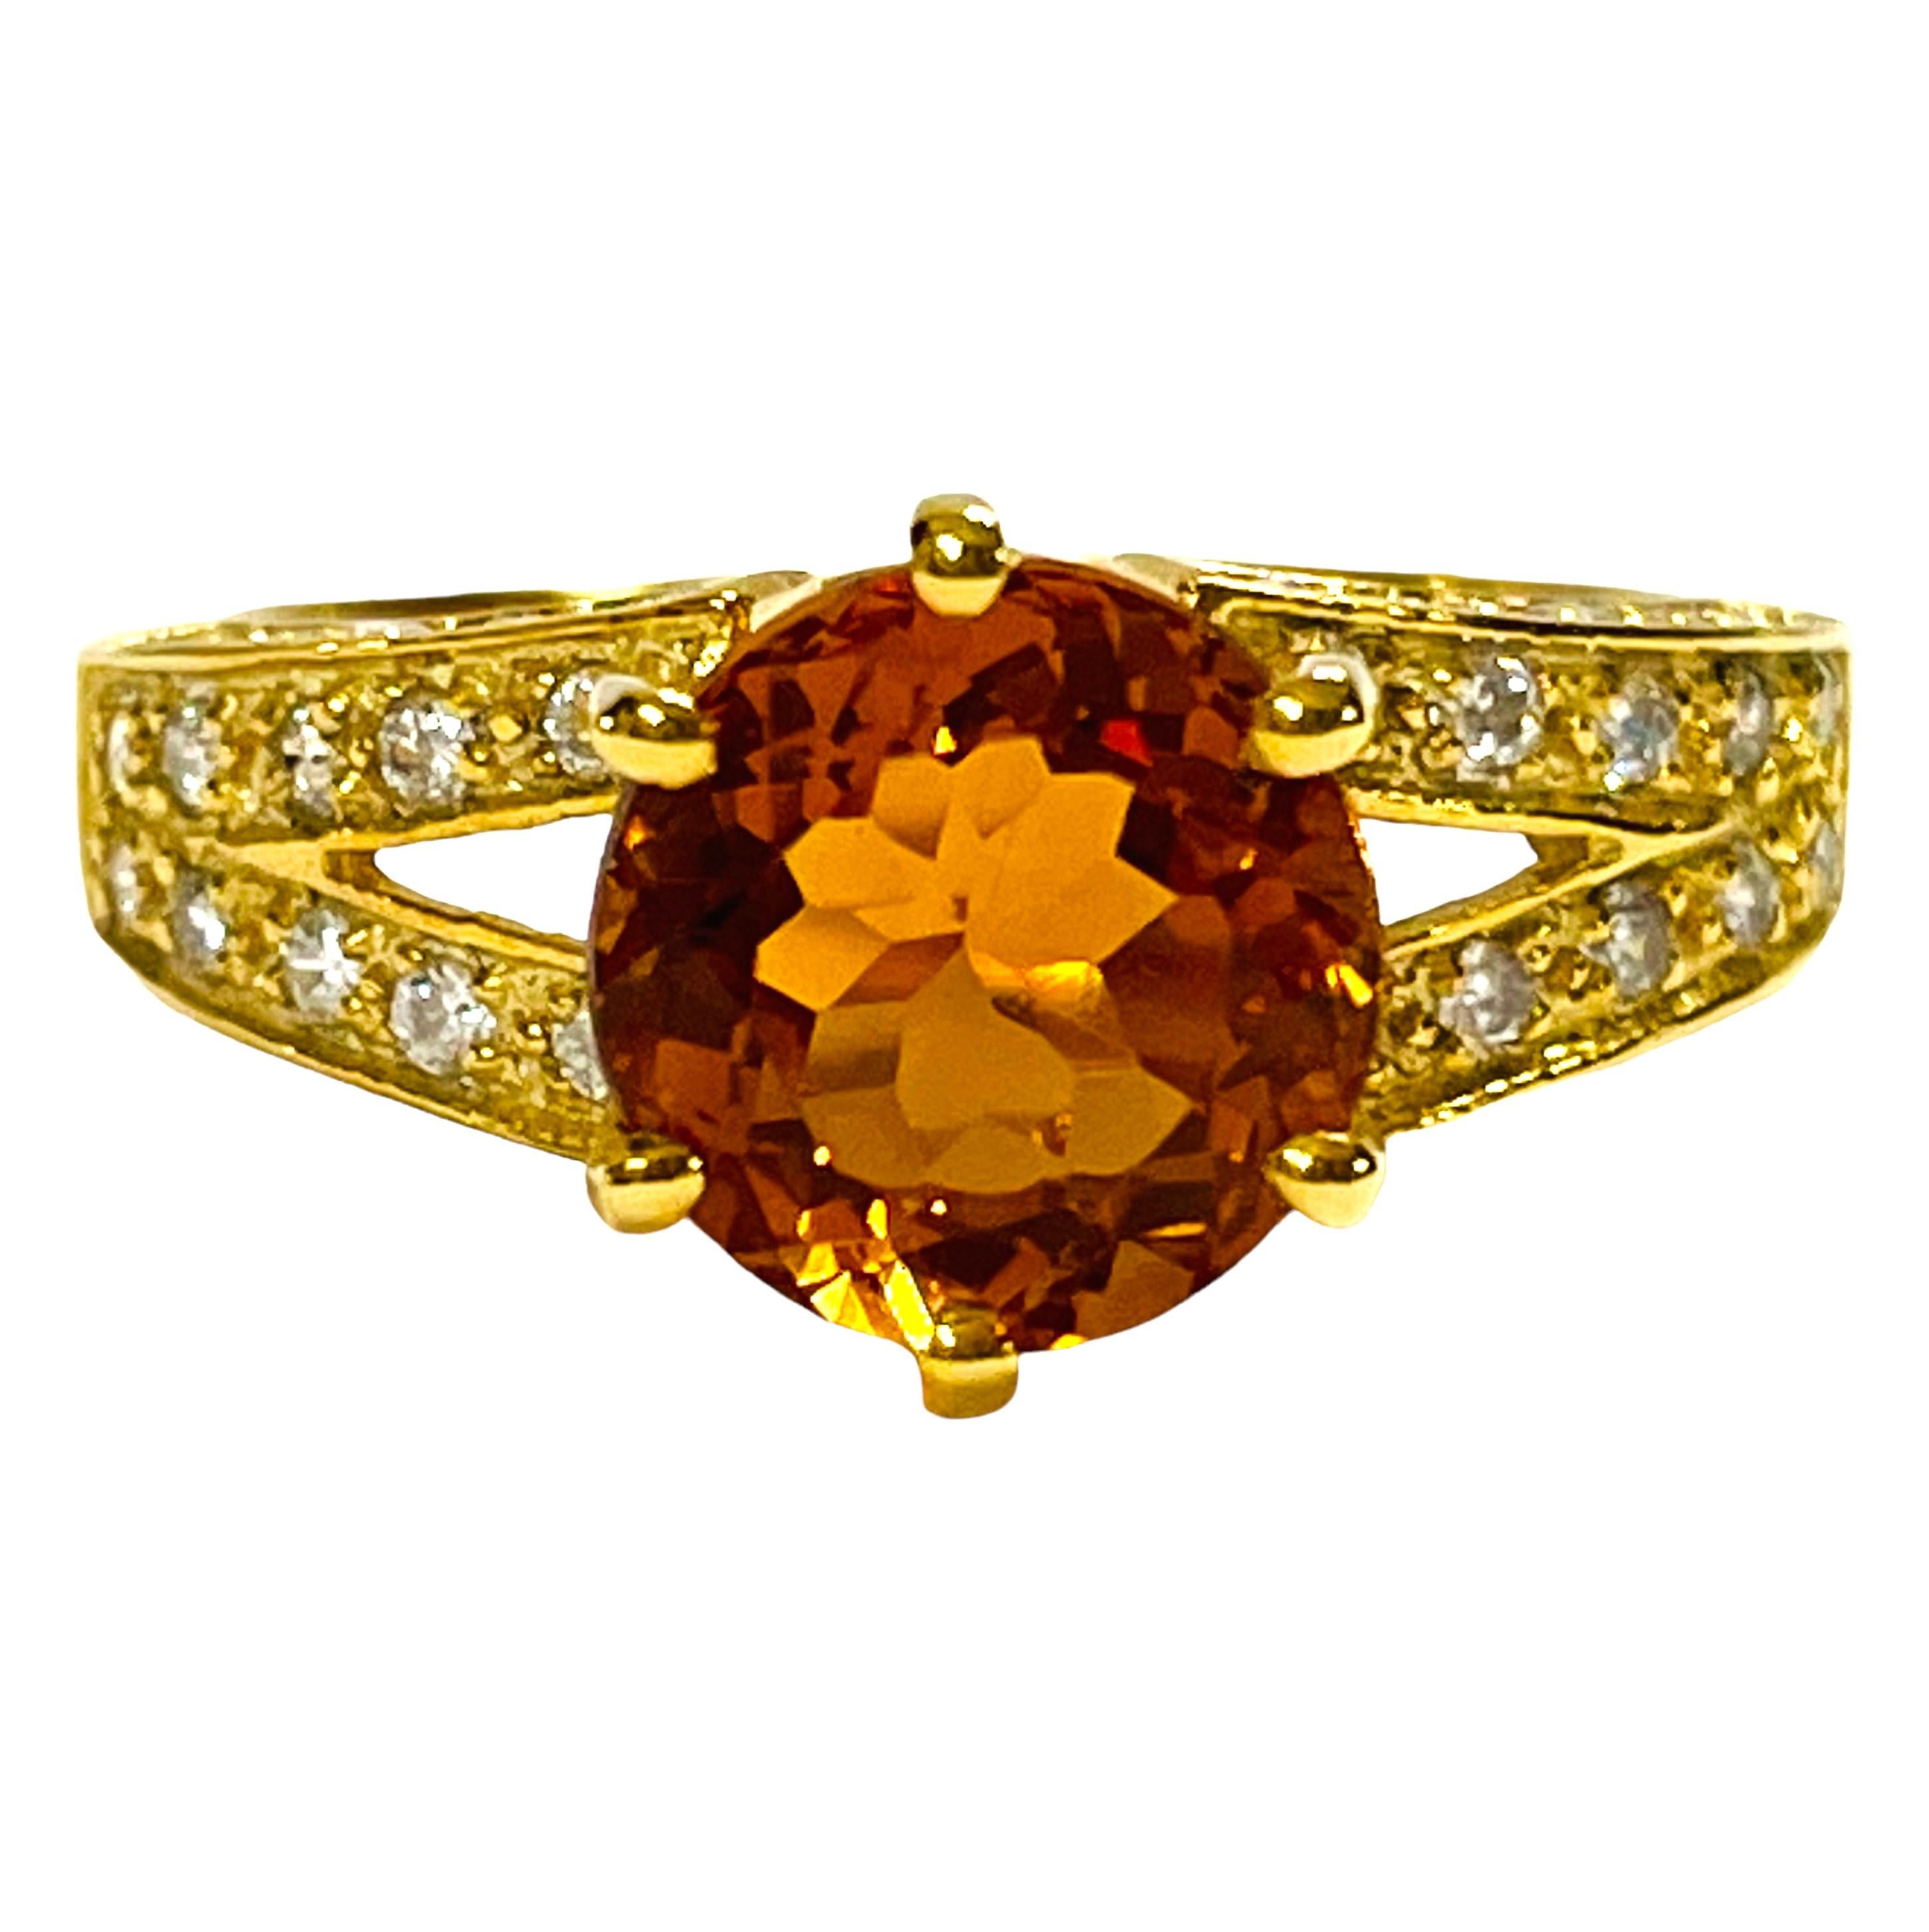 The main stone was mined in Africa and is just exquisite. It is a beautiful round cut and is 3.10 Ct   The main stone is 8 x 8 mm and it looks beautiful in this yellow gold setting. Very beautiful  indeed.  Sure to get noticed.  The weight in Grams